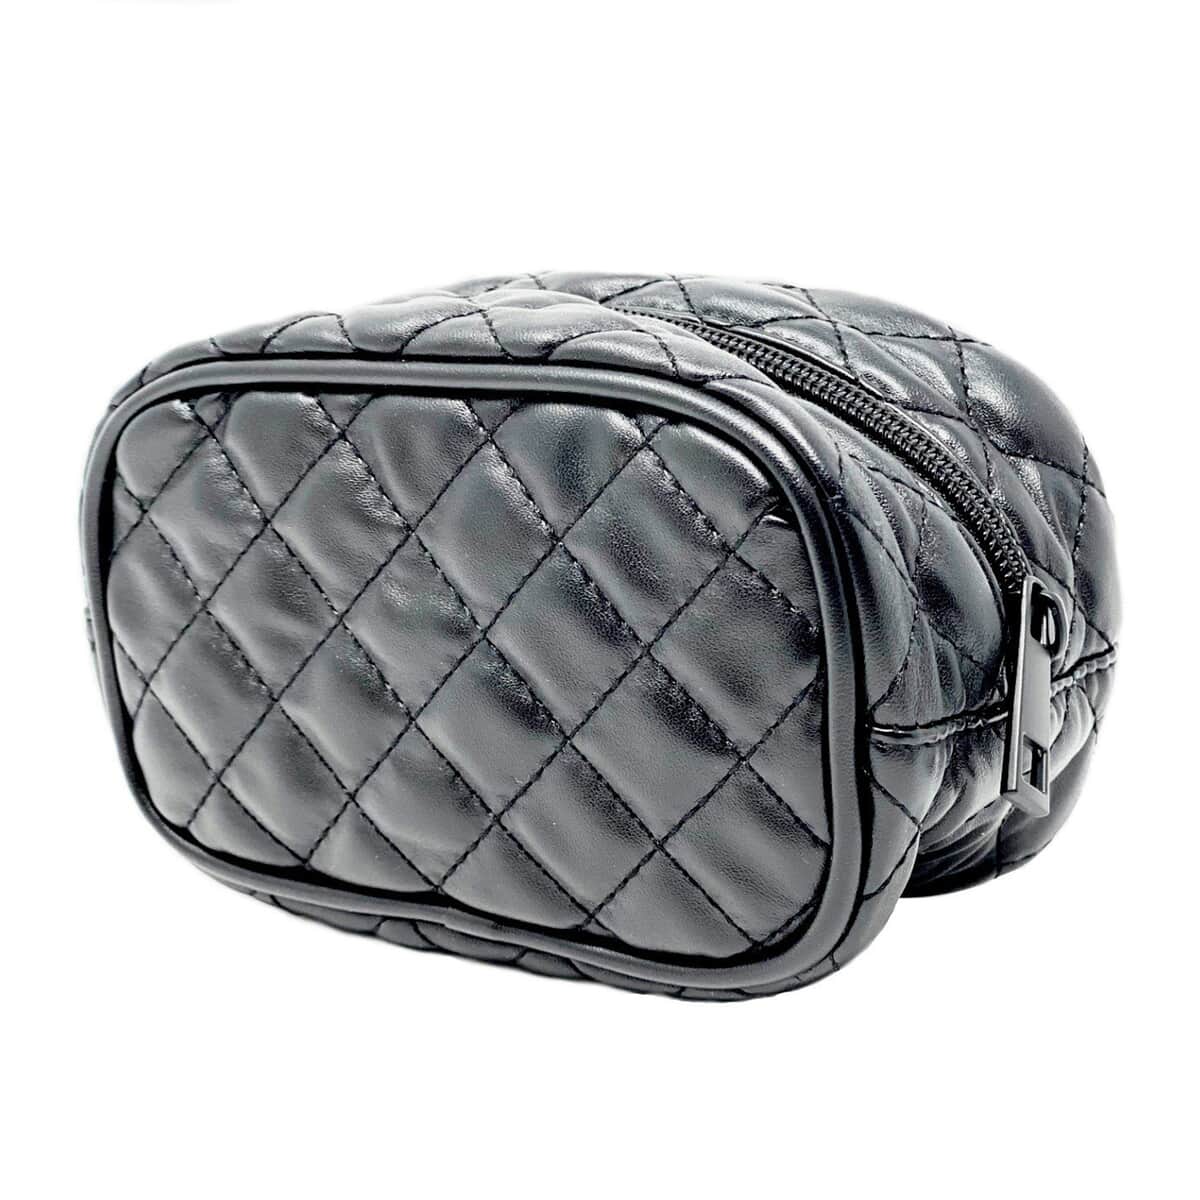 Black Quilted Pattern Vegan Leather Cosmetic Bag (6.25"x3"x4") image number 4